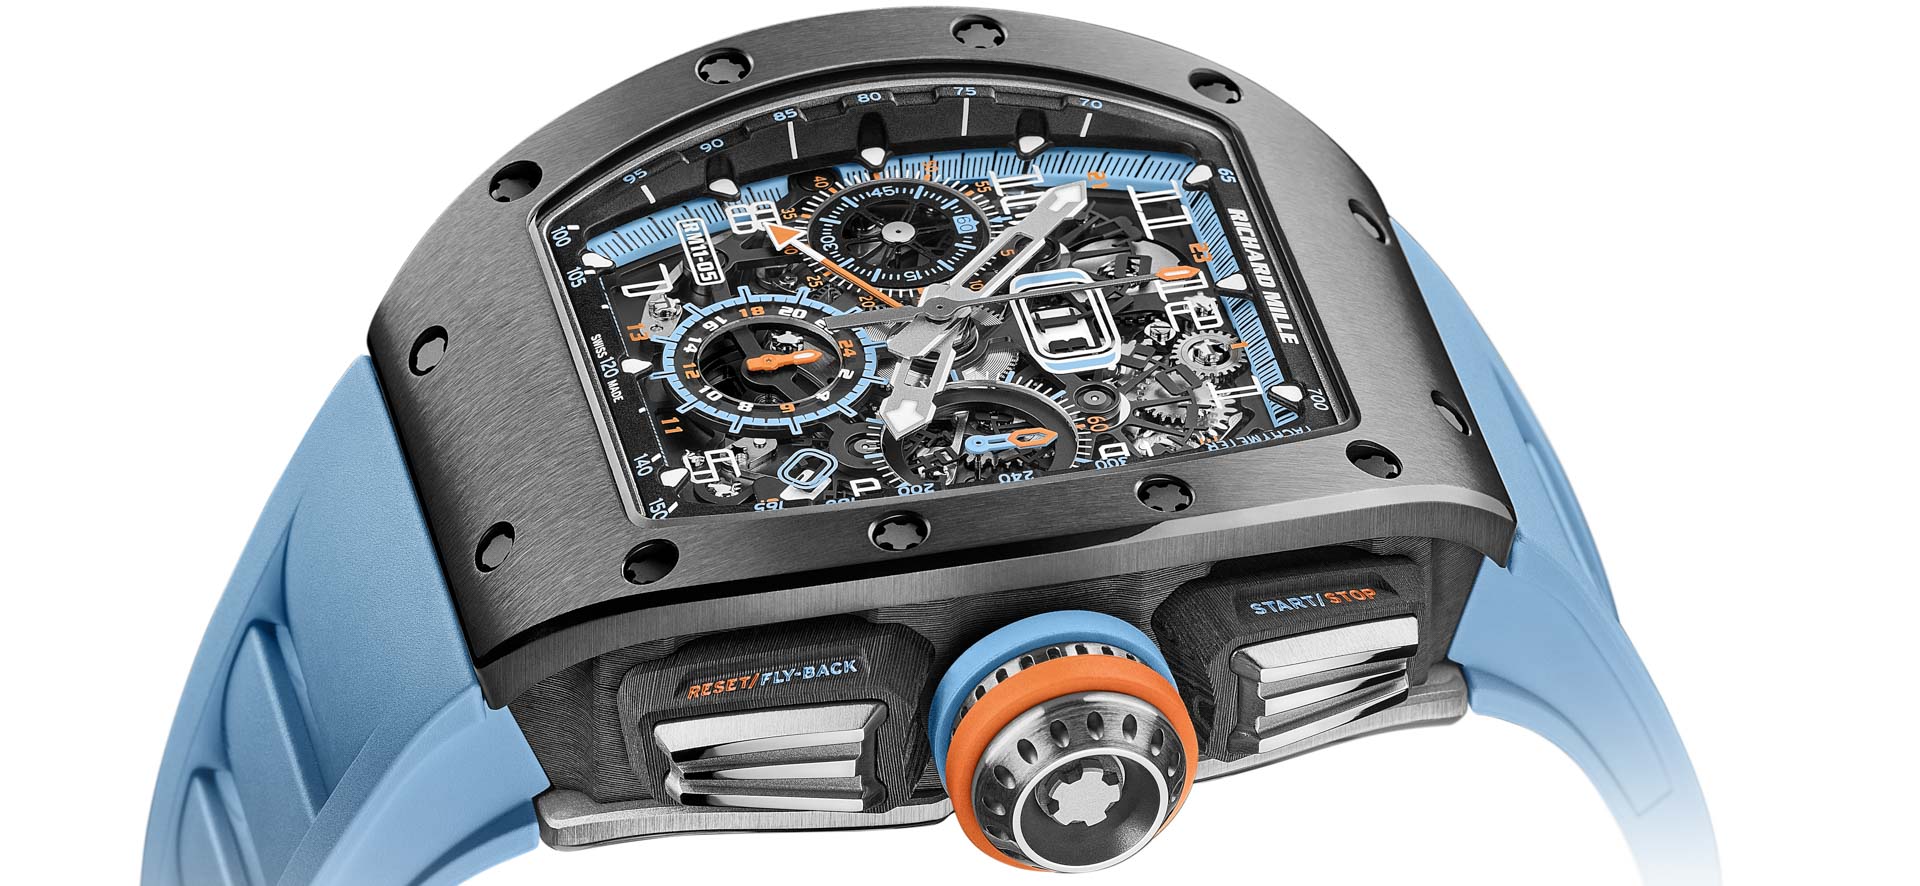 Richard Mille RM 11-05 Automatic Flyback Chronograph GMT Watch Debuts New Cermet Material